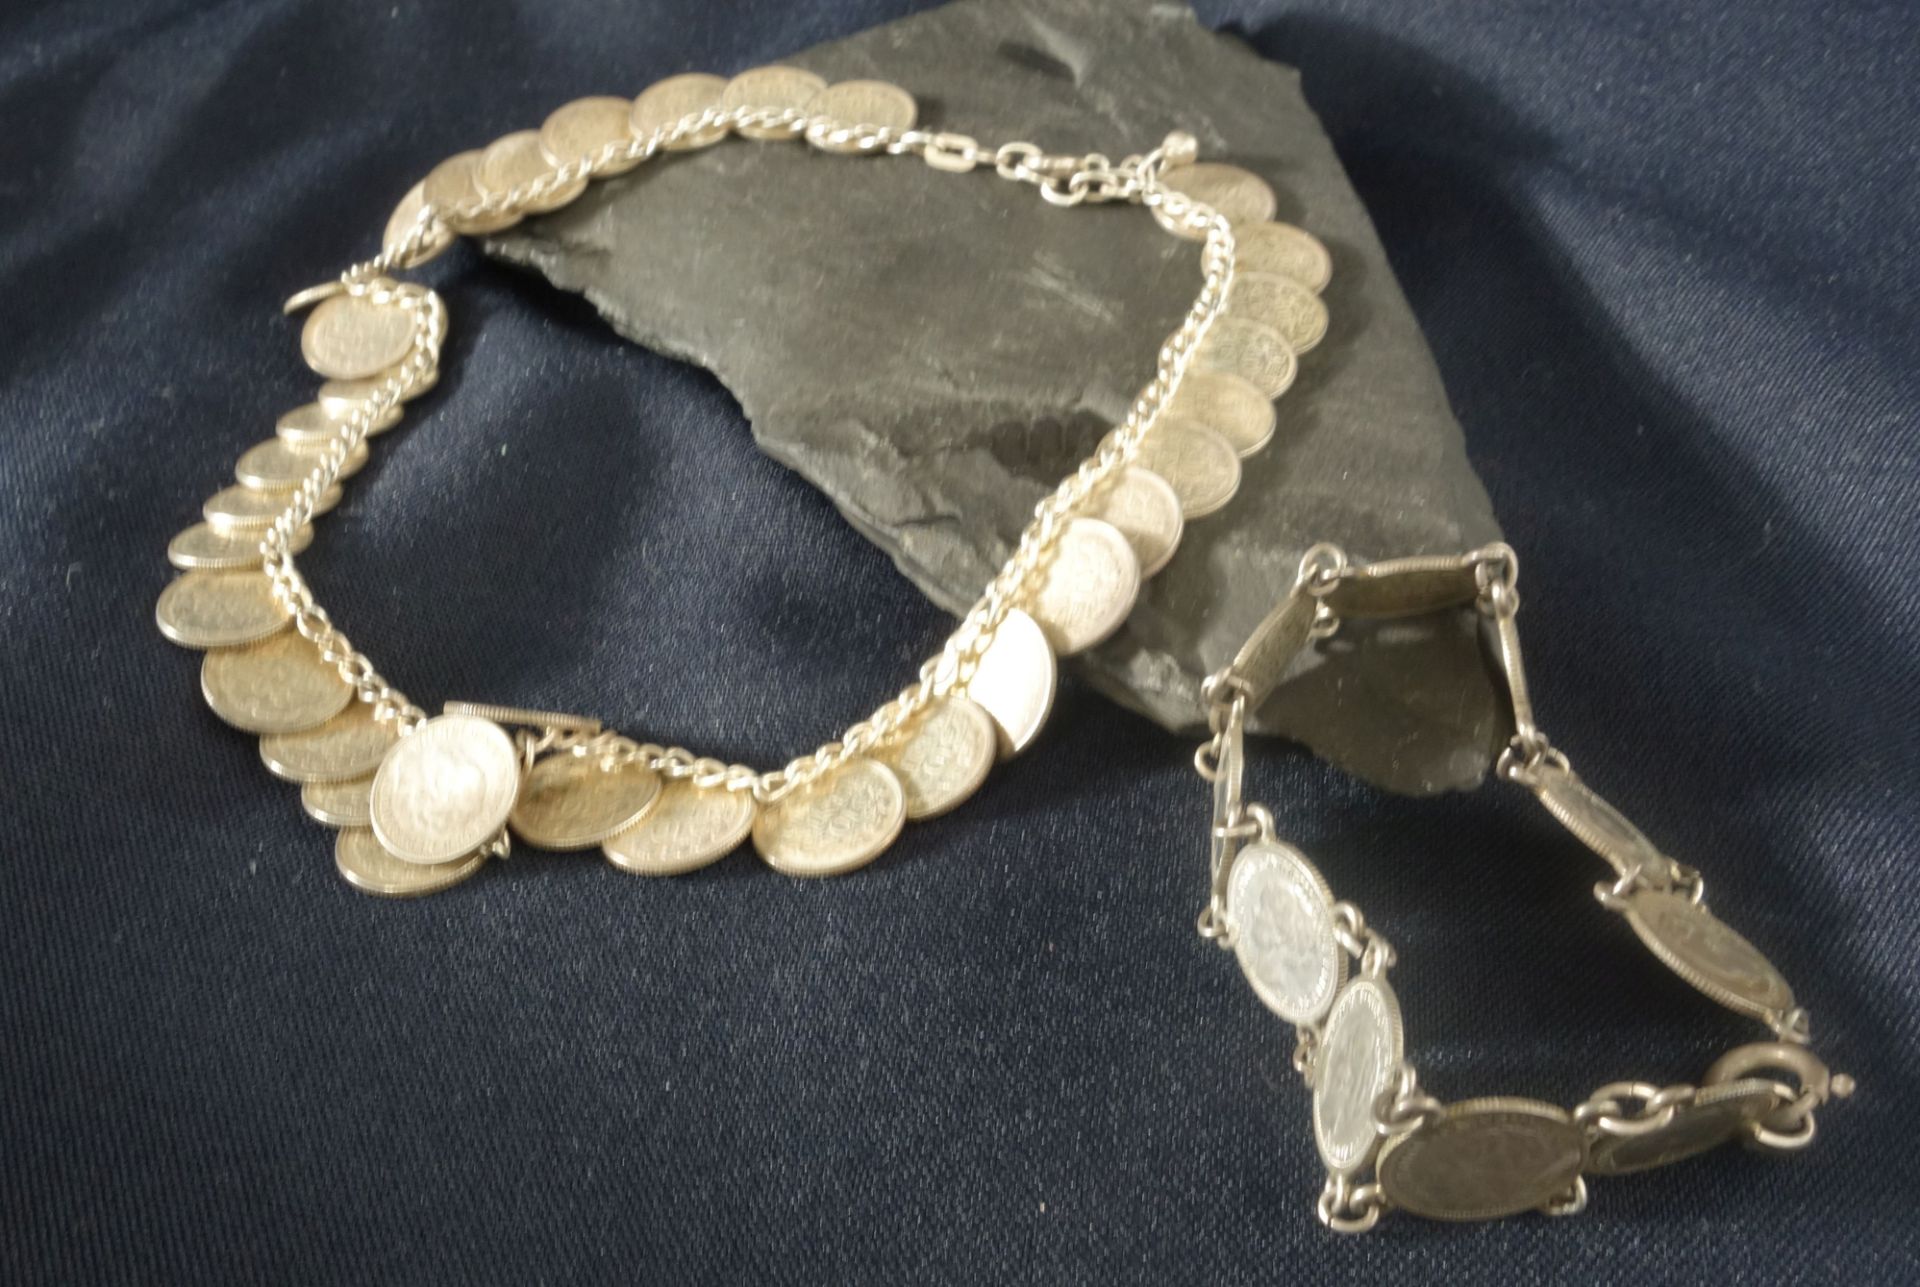 JEWELLERY SET: COIN BRACELET AND COIN NECKLACE - Image 5 of 6